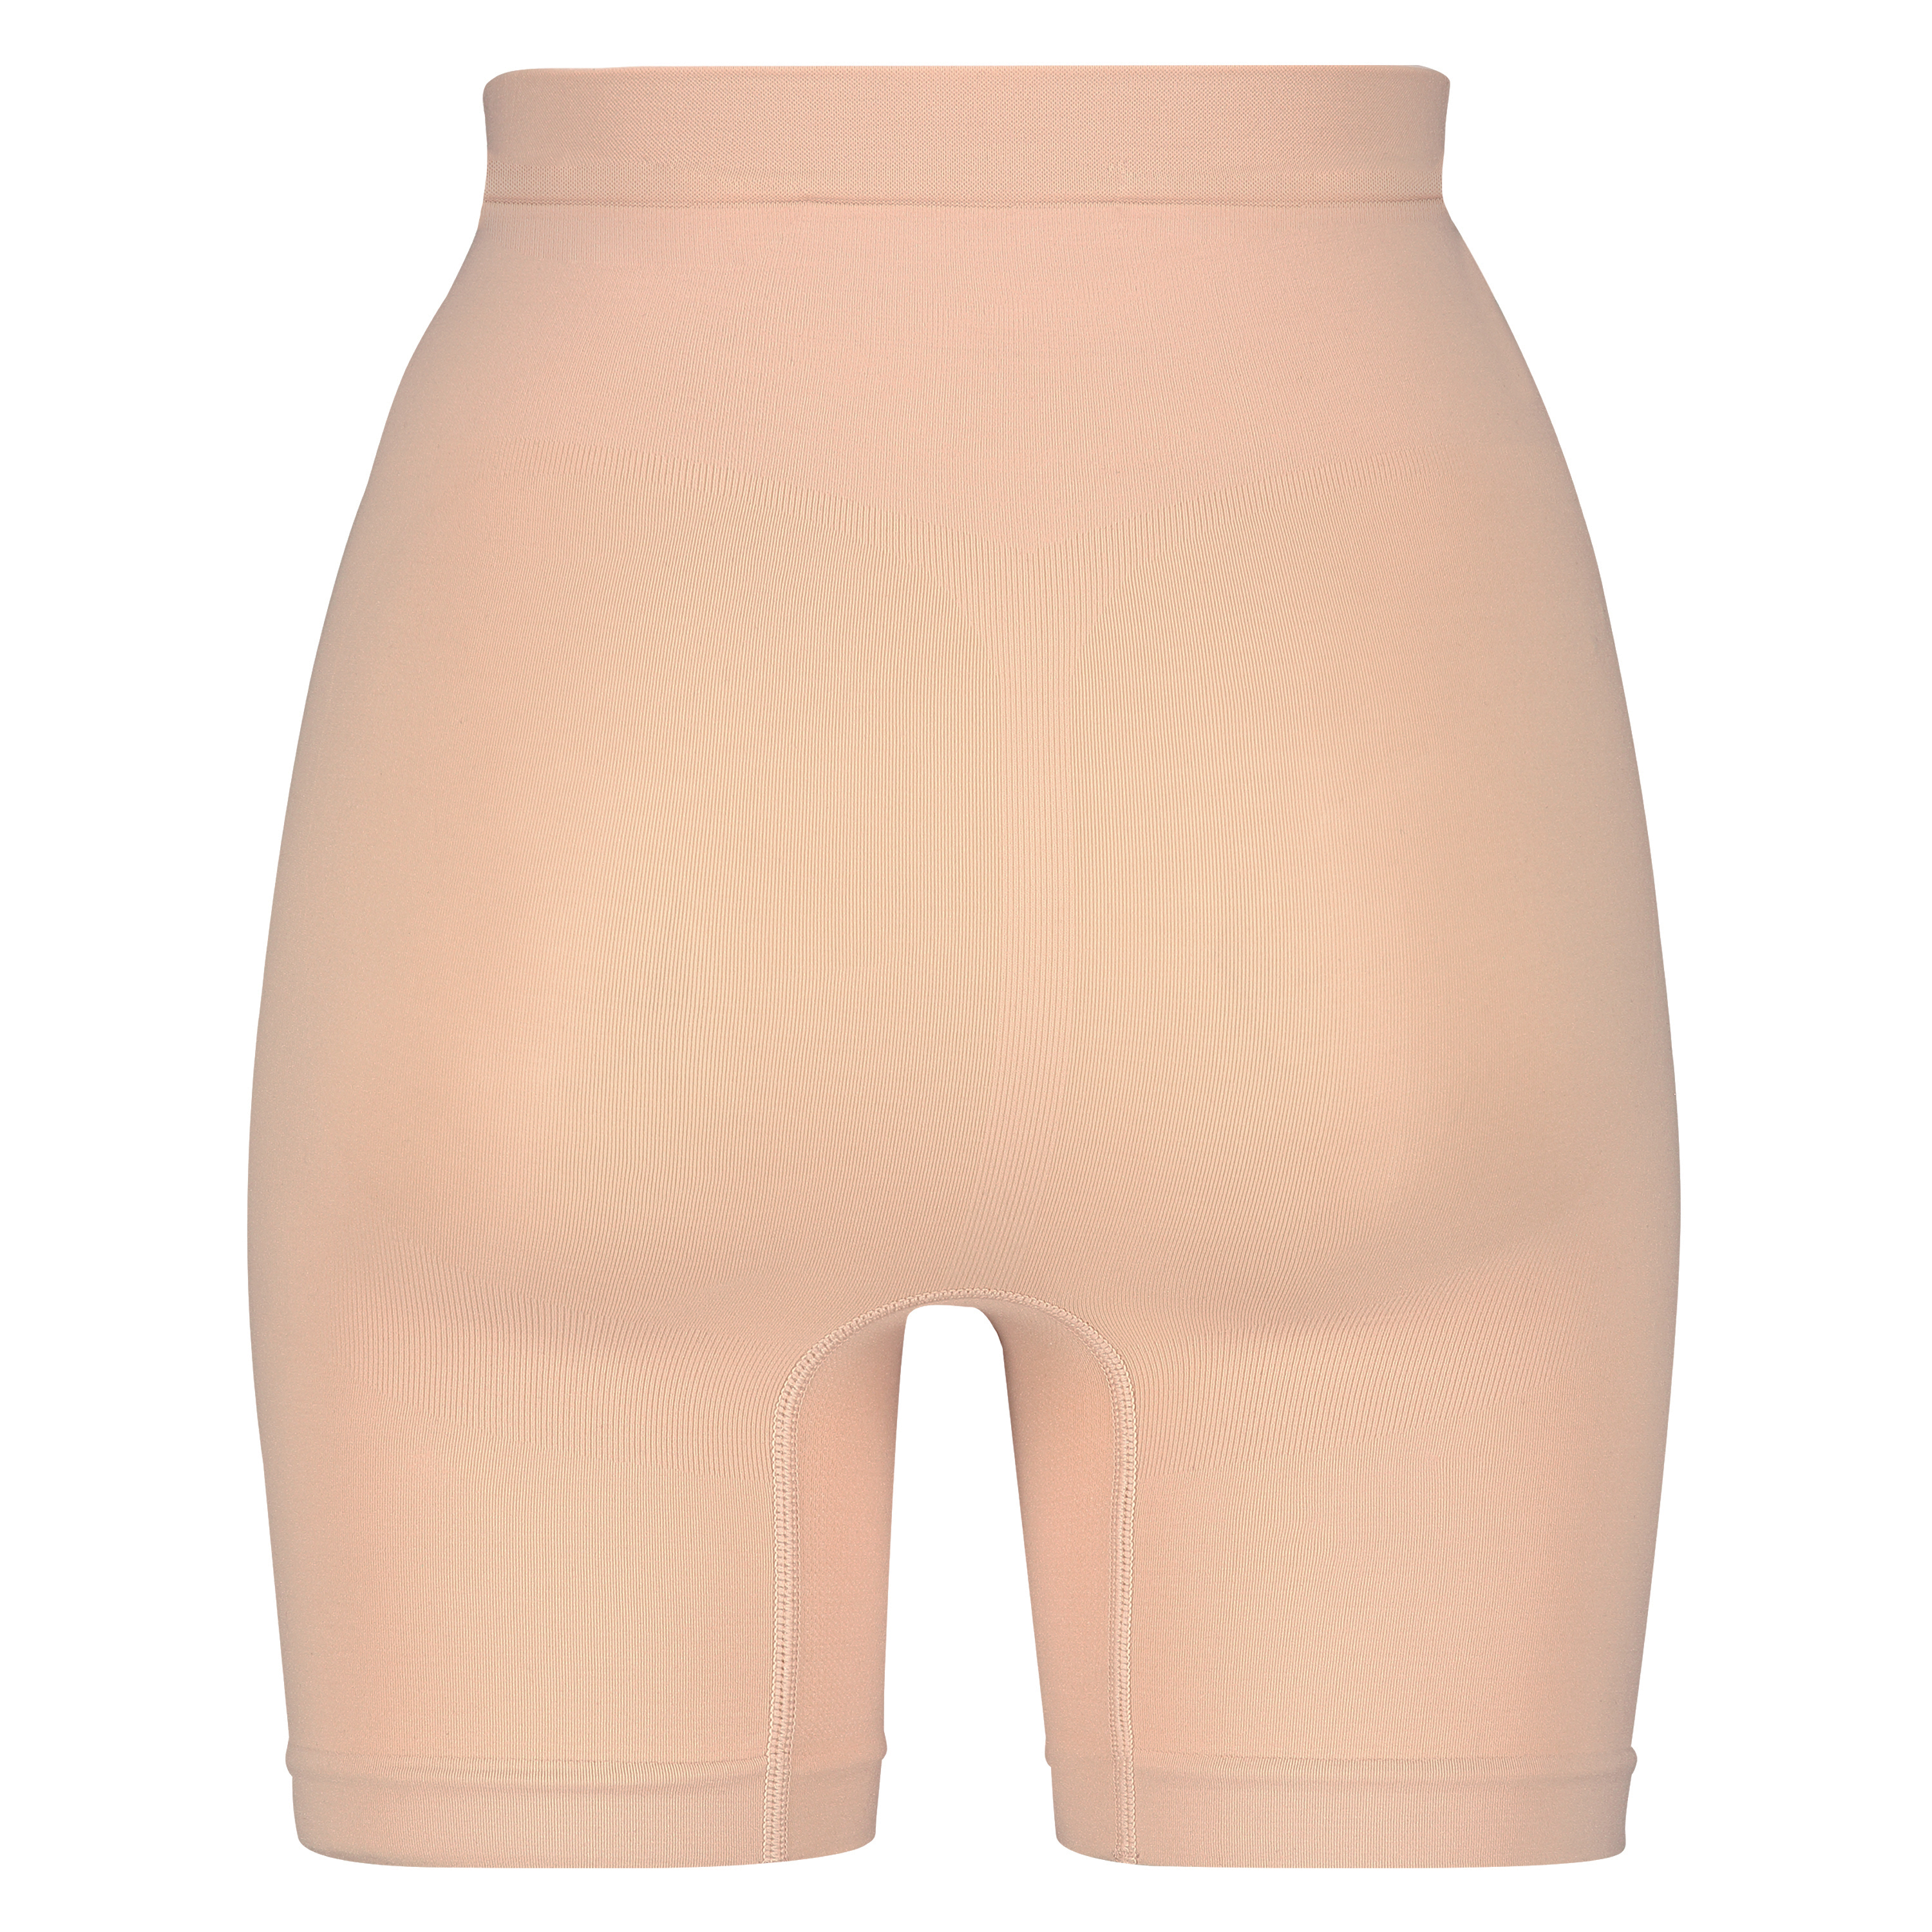 Firming high waisted thigh slimmer - Level 2, Beżowy, main